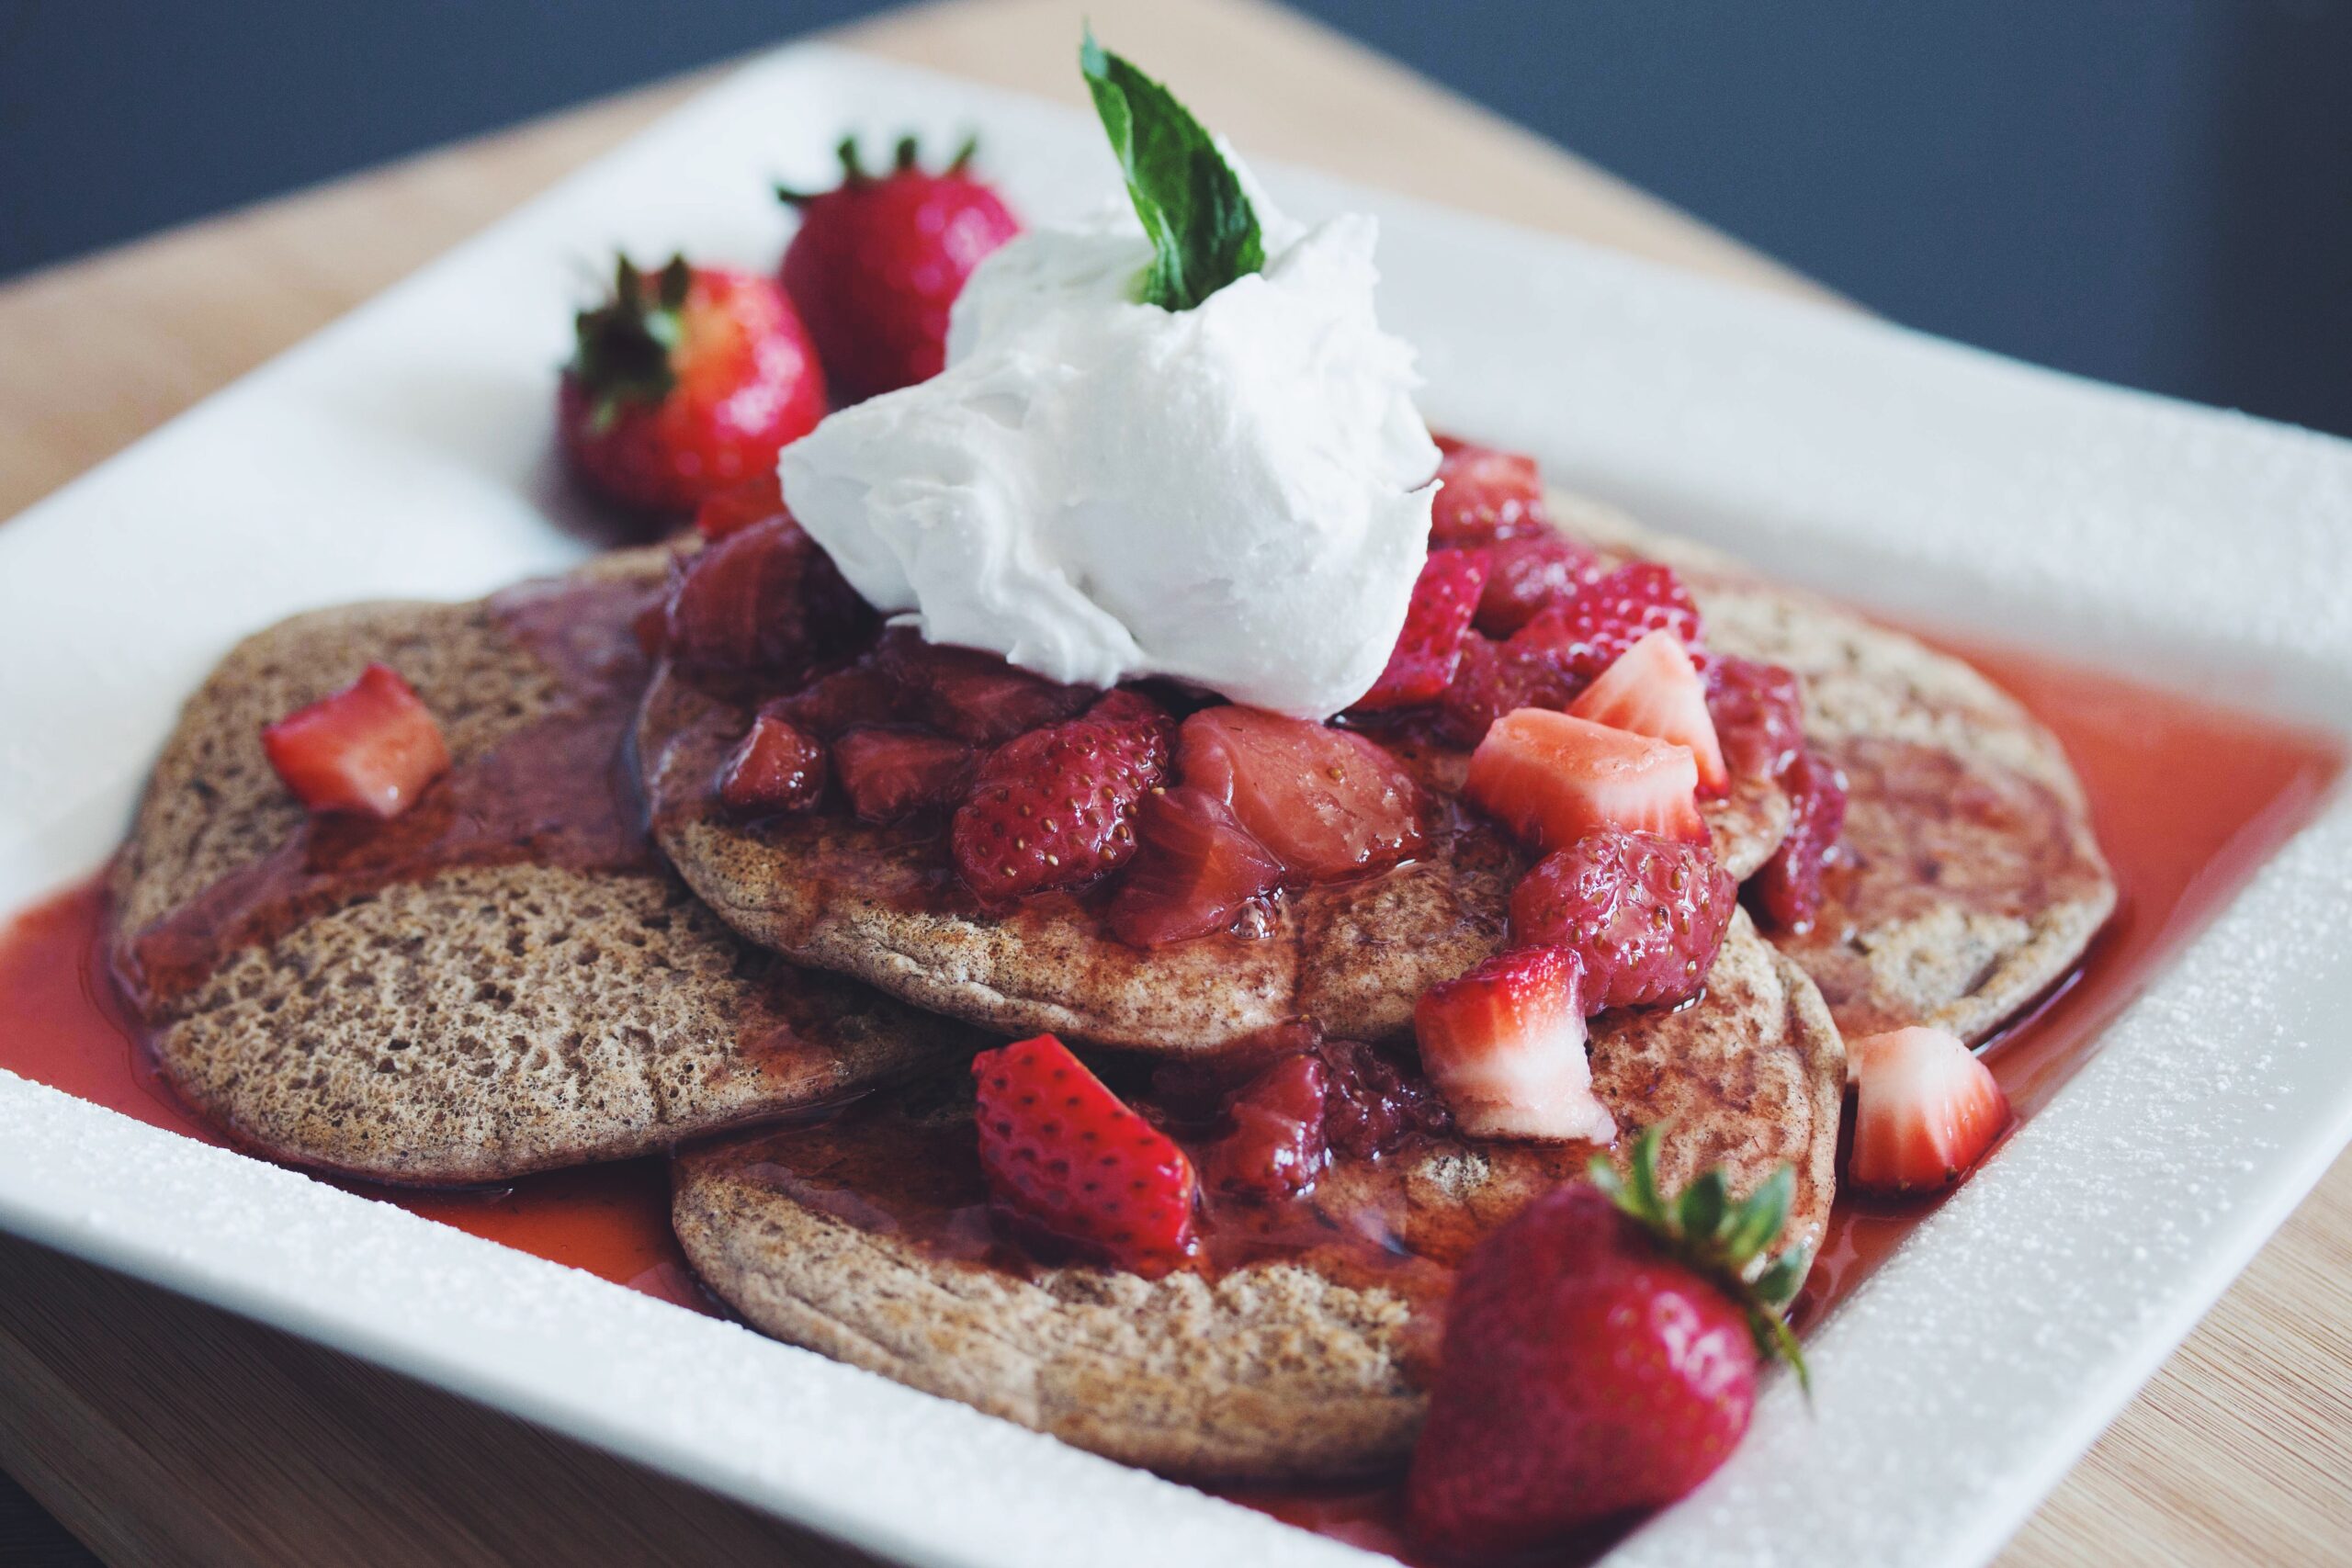 Buckwheat Pancakes With Brandied Strawberries & Coconut Whip